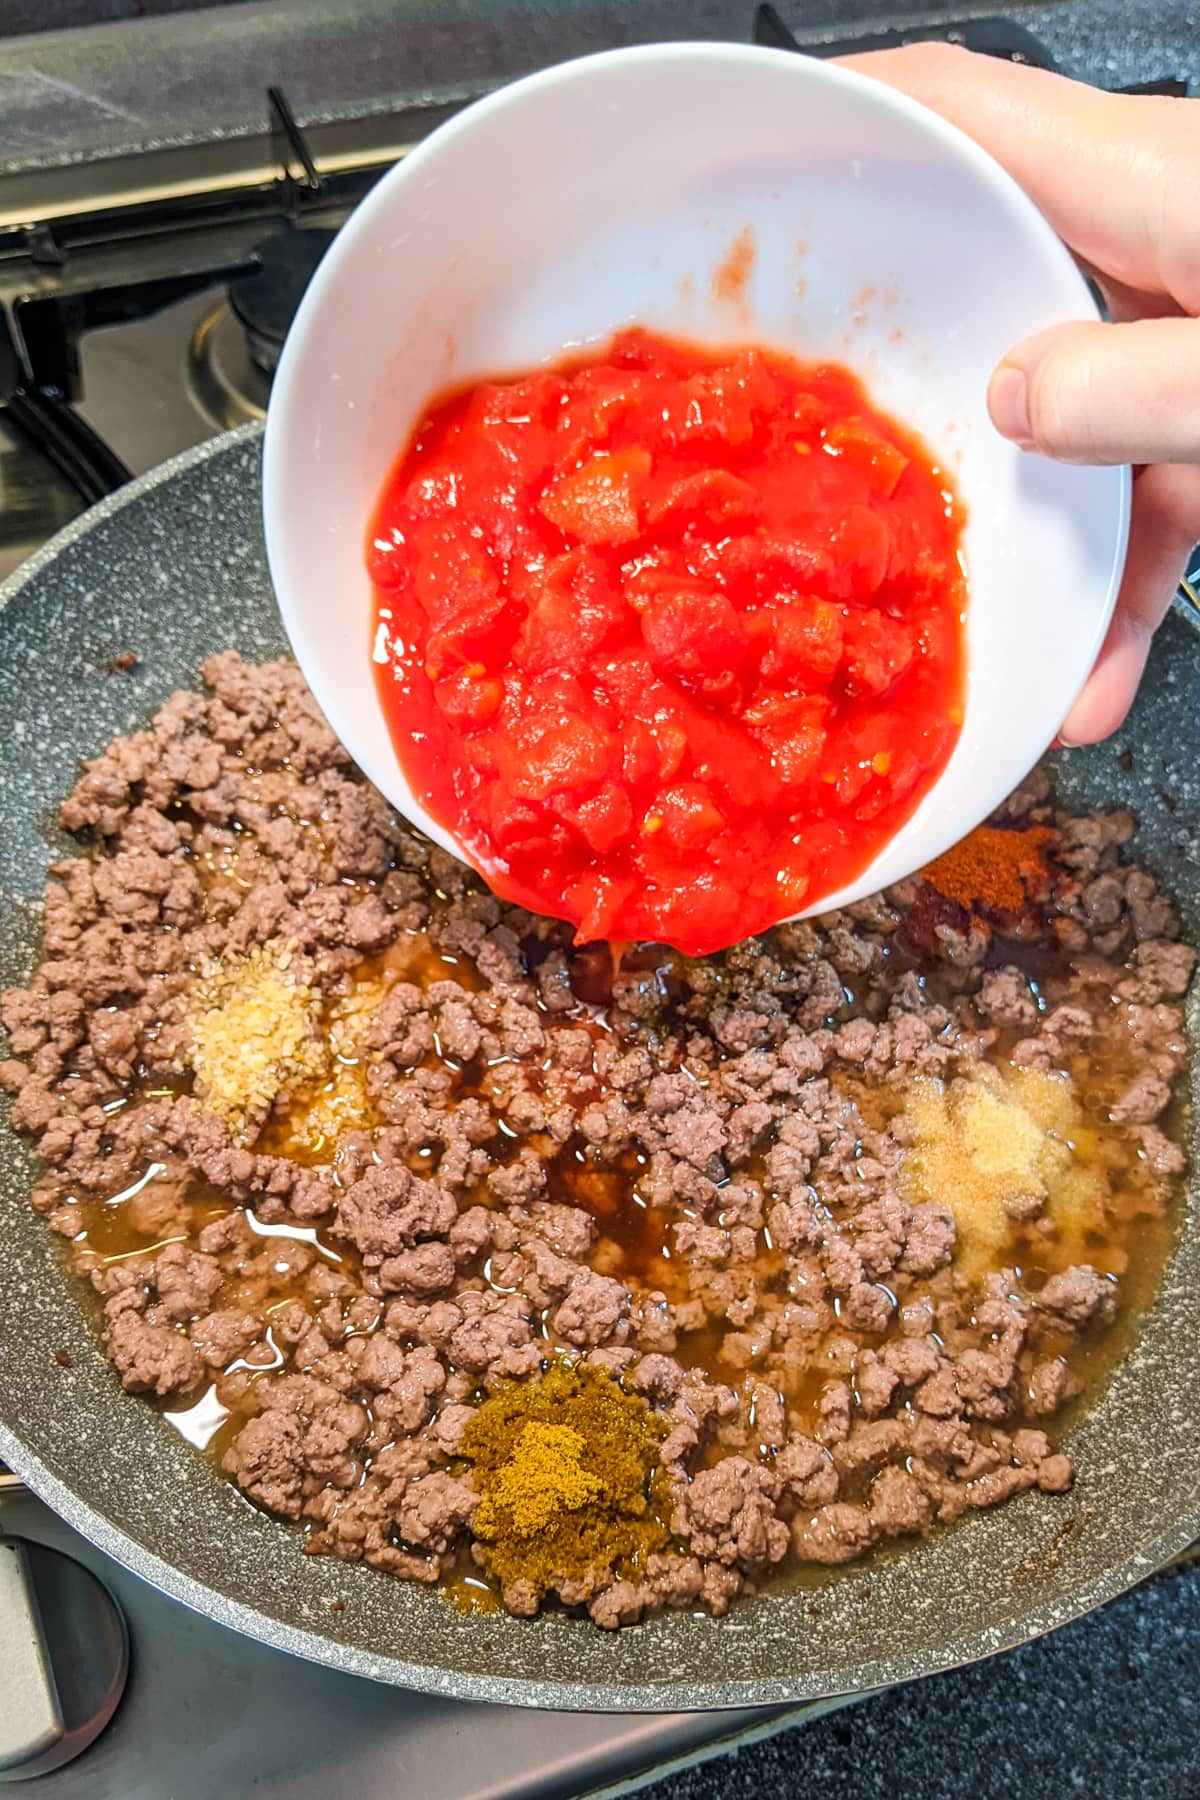 Pouring tomato sauce over fried ground beef.